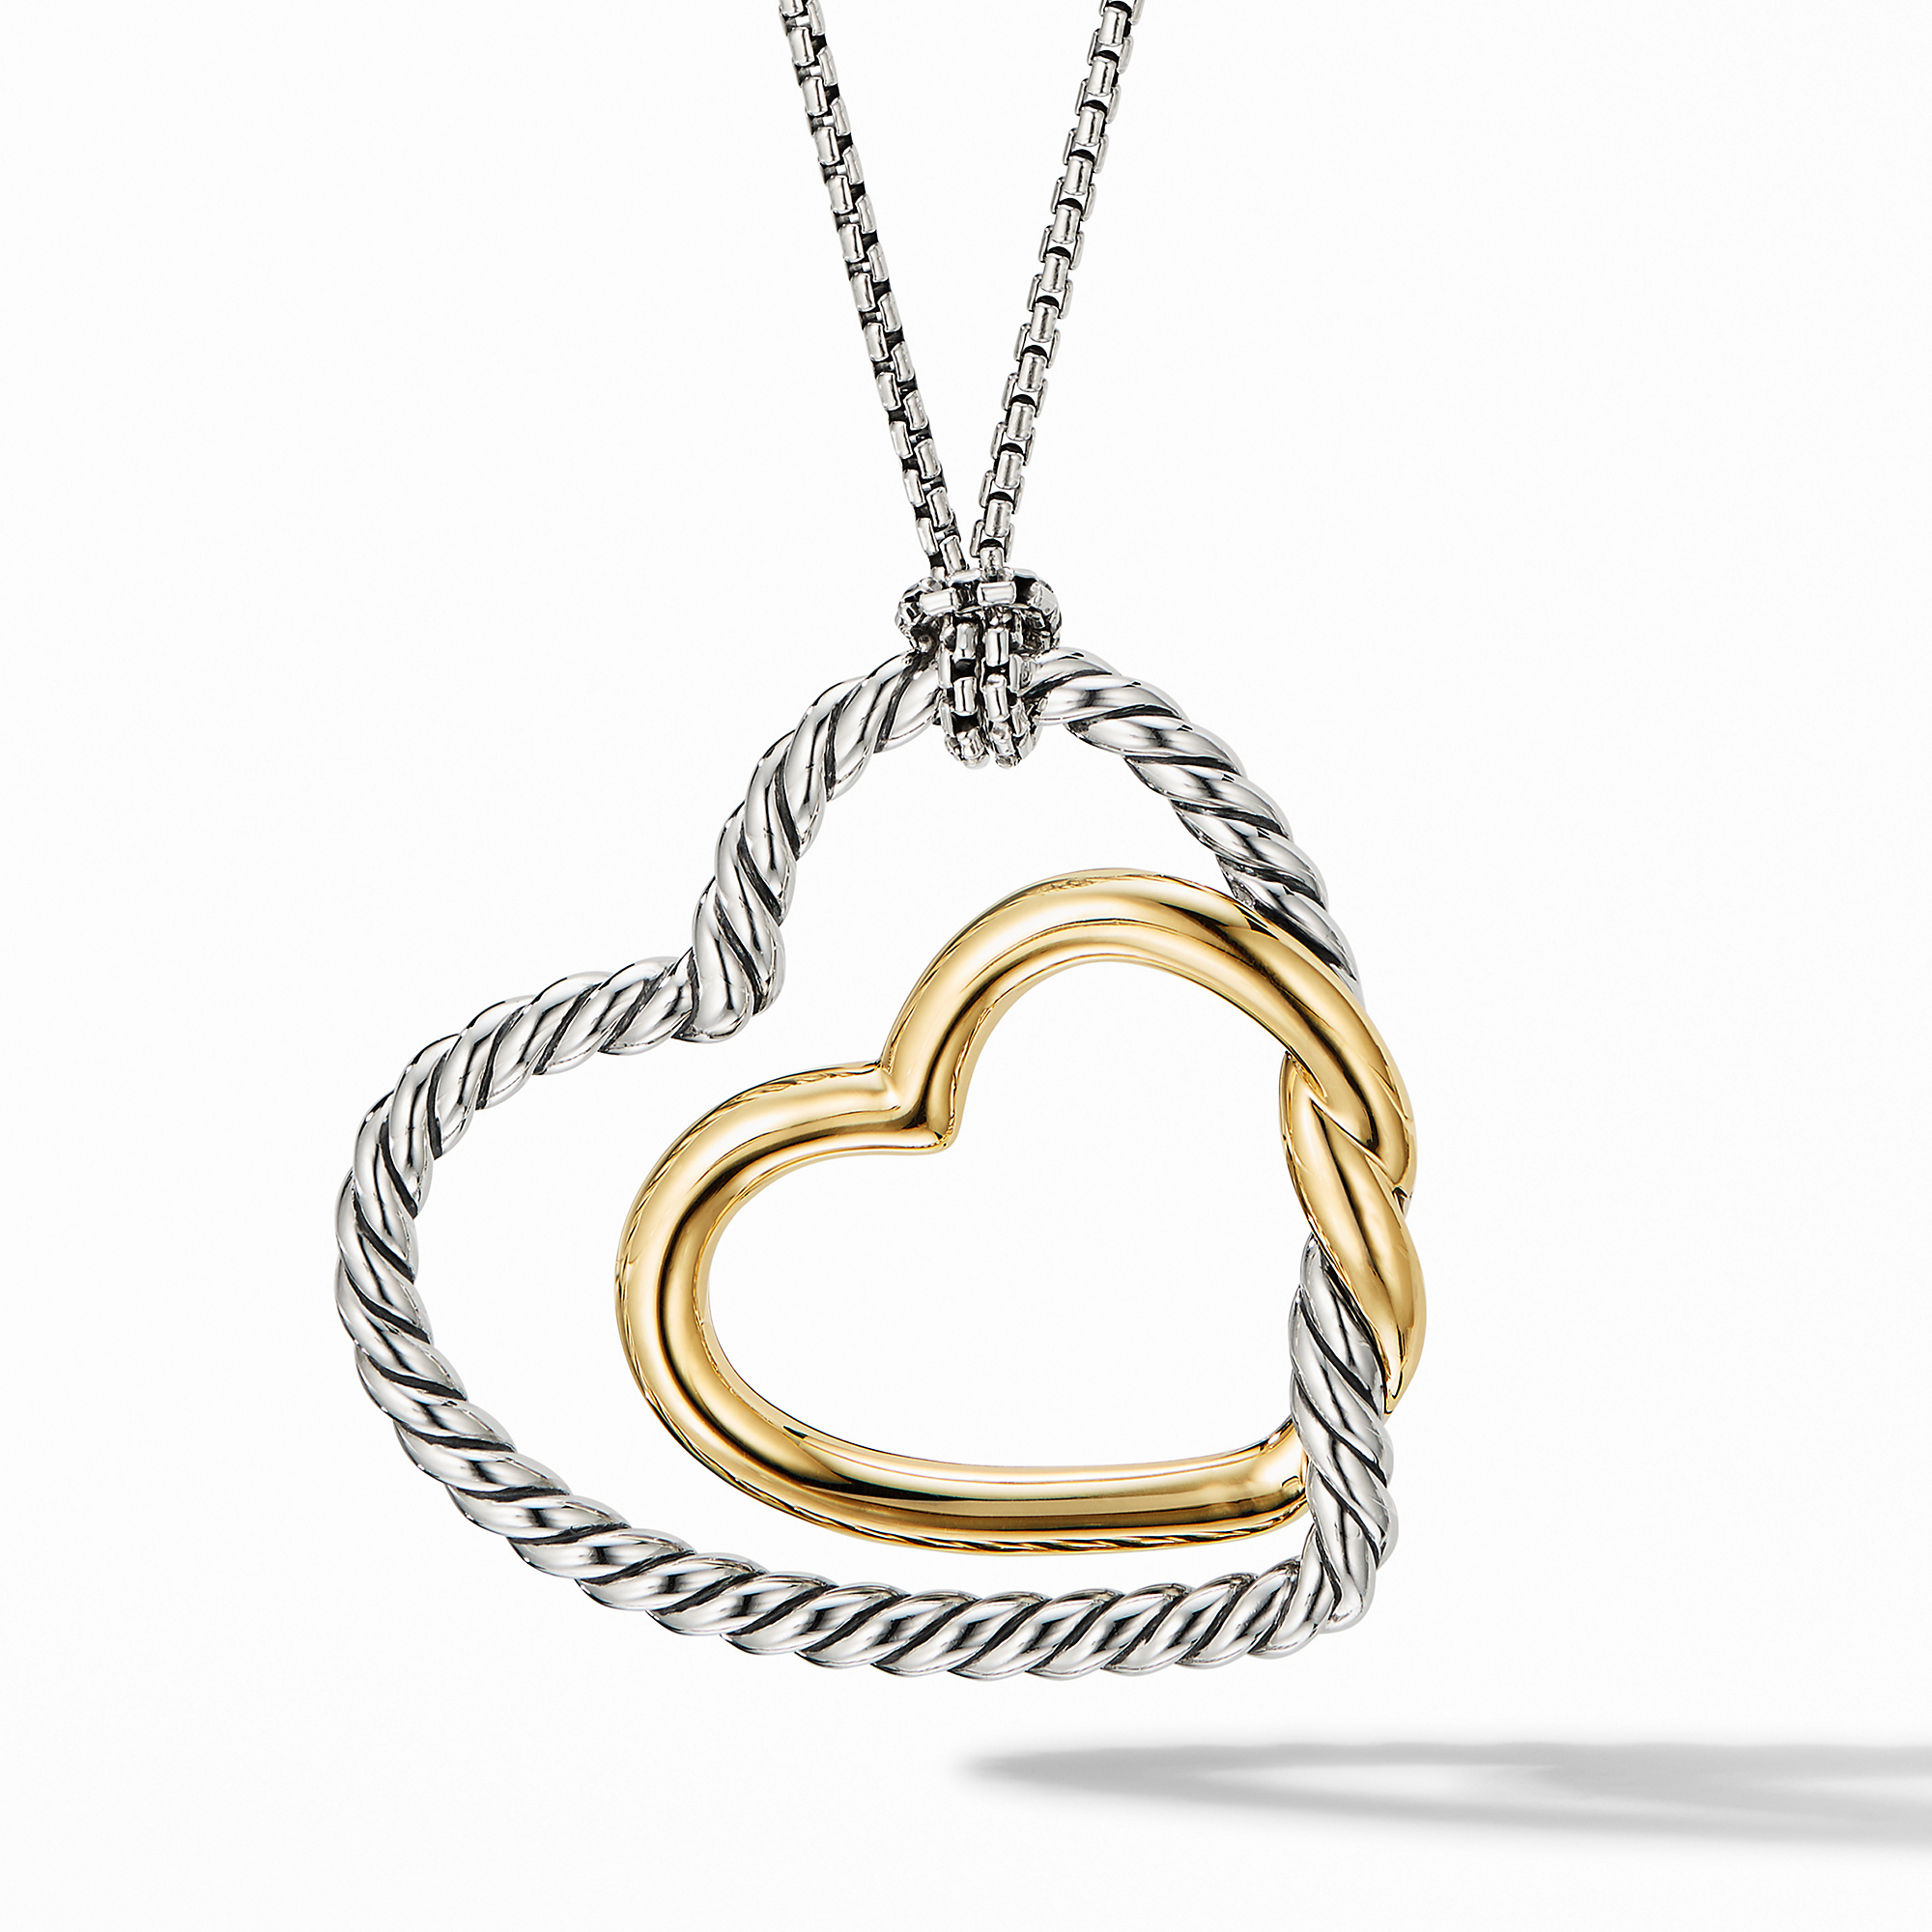 Continuance Heart Necklace with 18K Yellow Gold